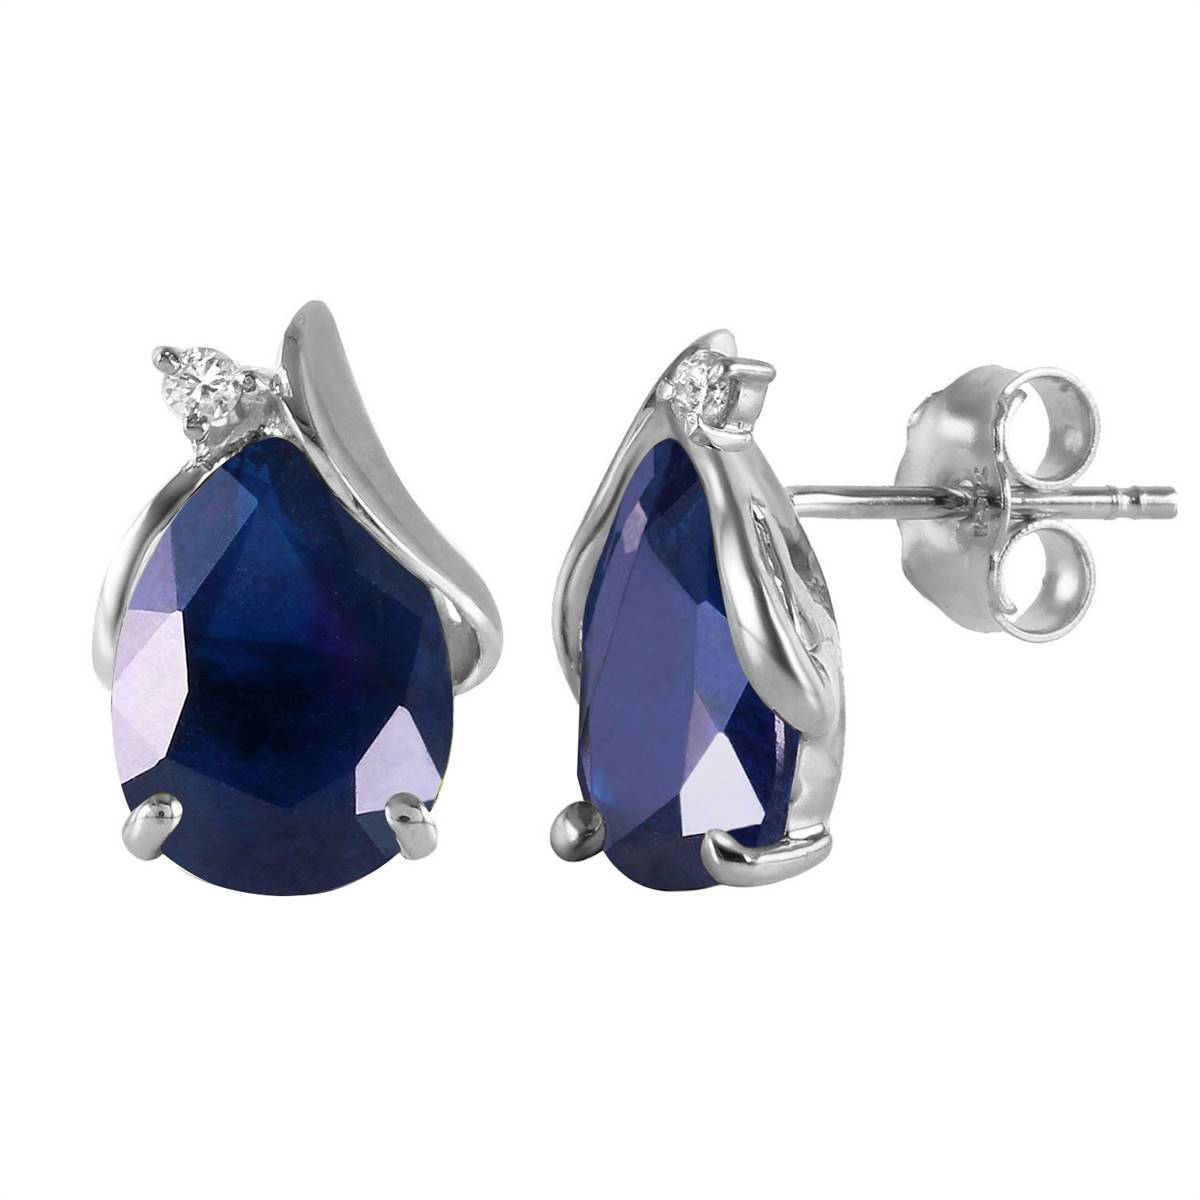 14K Solid White Gold Studs Earrings Natural Diamond & Sapphire Certified